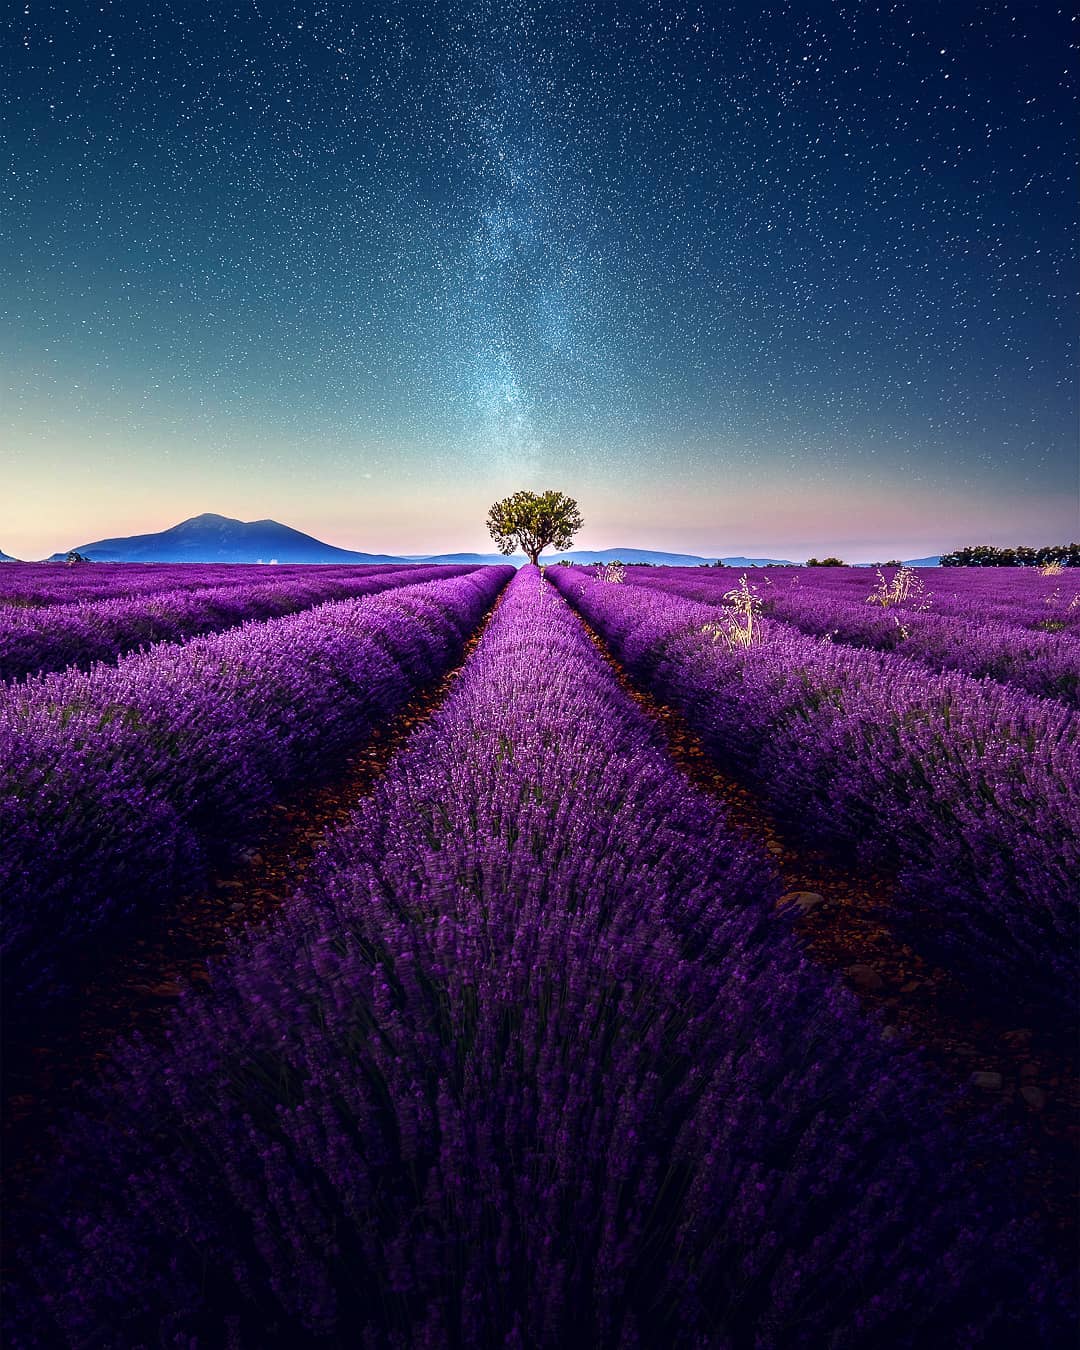 Gorgeous Image of French Lavender Fields at Night